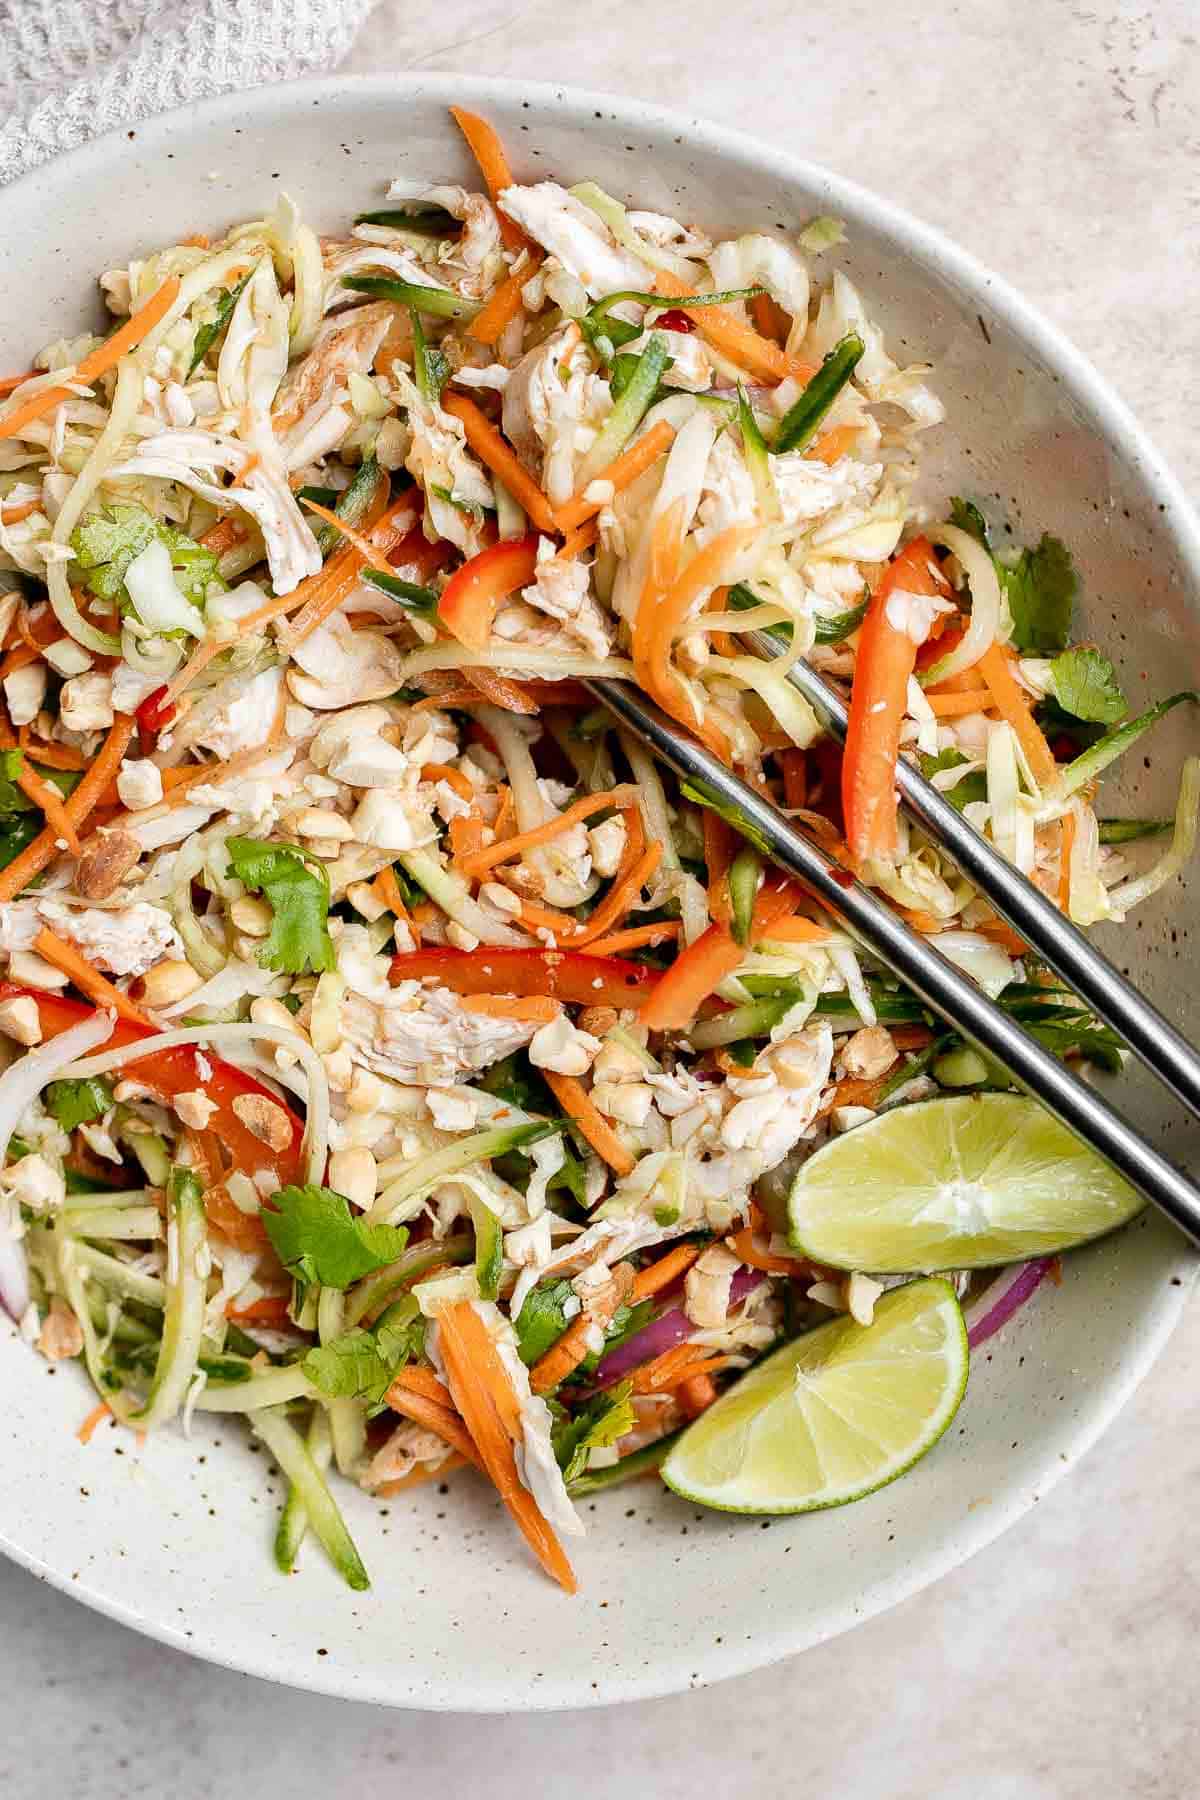 Vietnamese chicken salad (known as goi ga) made with shredded chicken and nuoc cham dressing is a fresh, tangy salad full of flavor, color, and texture. | aheadofthyme.com